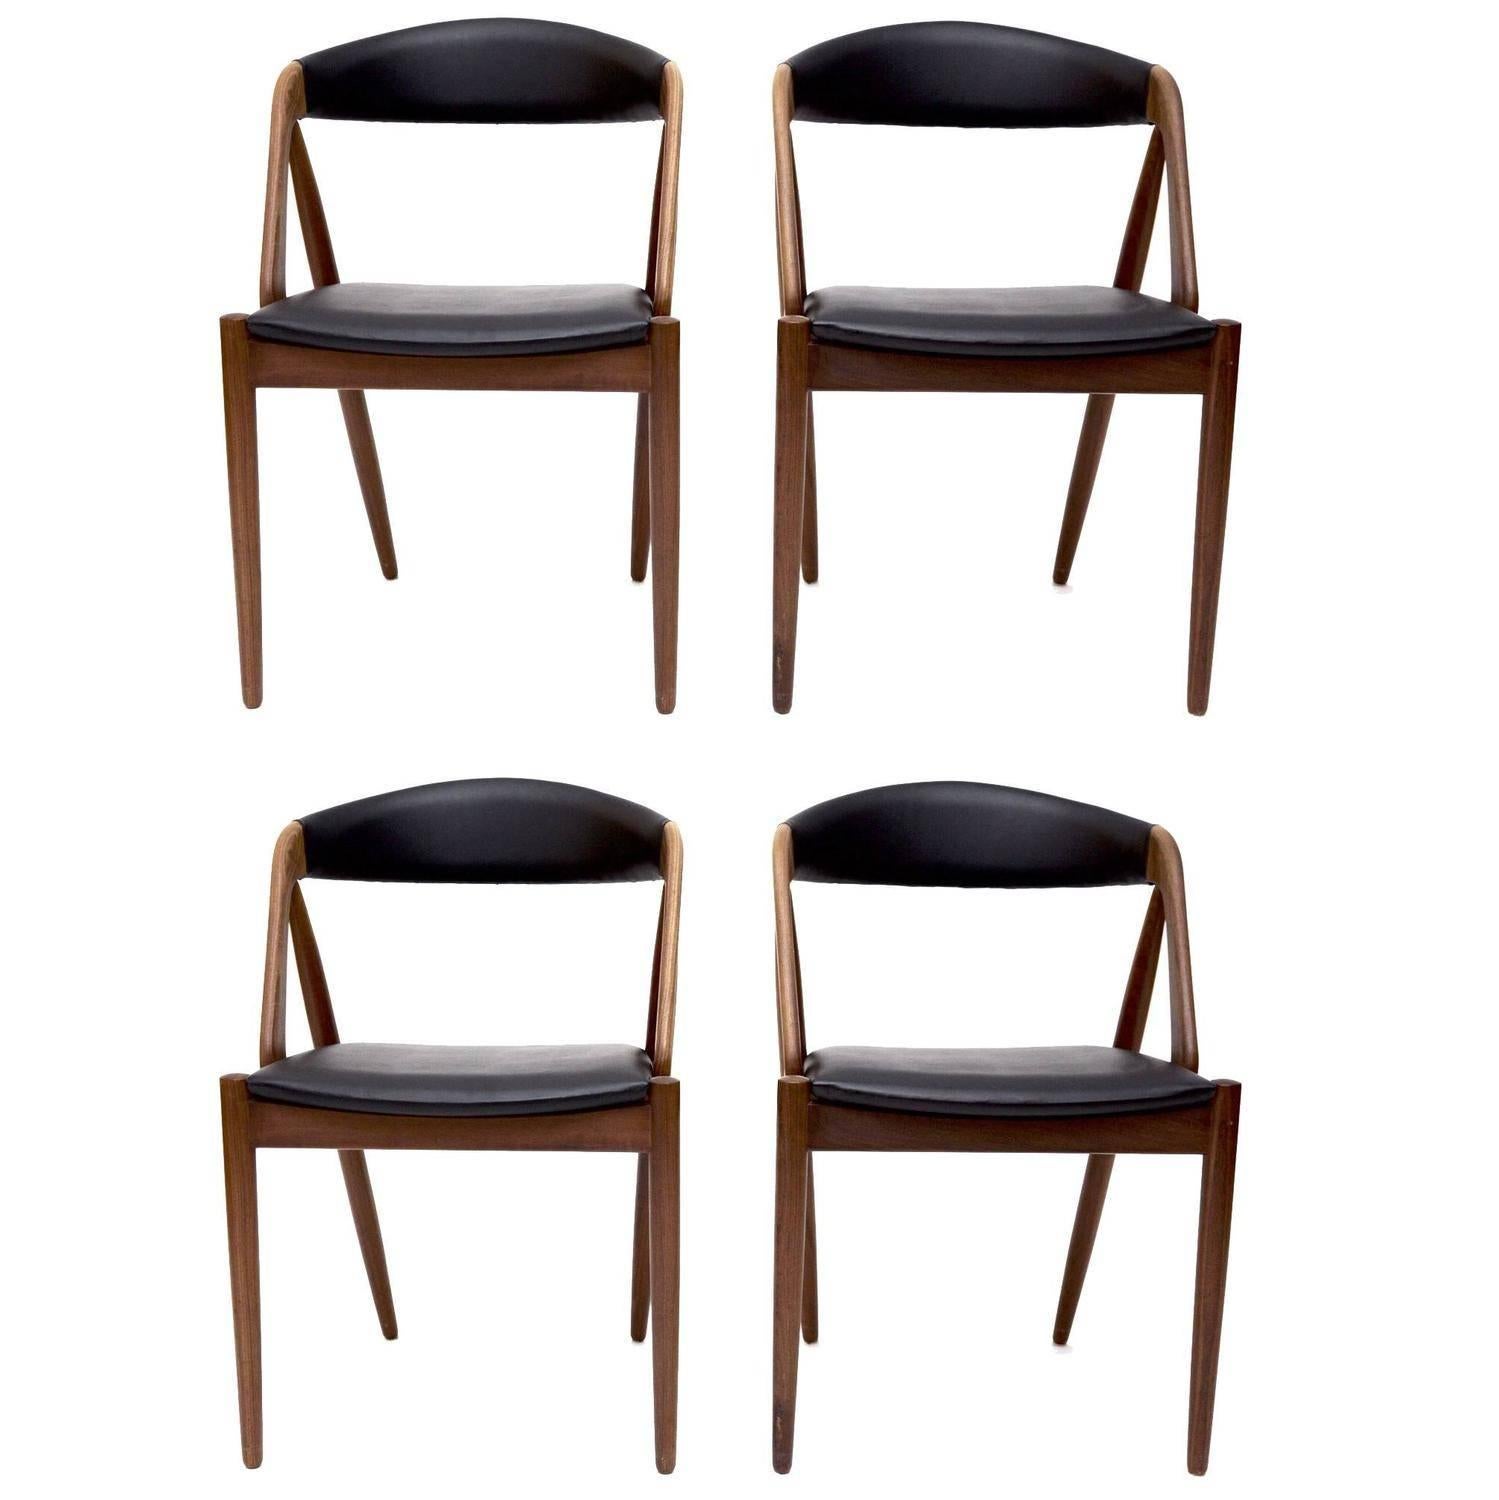 Six classic chairs by Kai Kristiansen. The unique model 31 is a beautiful chair with deep curved backrest that provides great comfort. 

The frames are made of teak and seats and backrests are professionally reupholstered.

Each chair has been